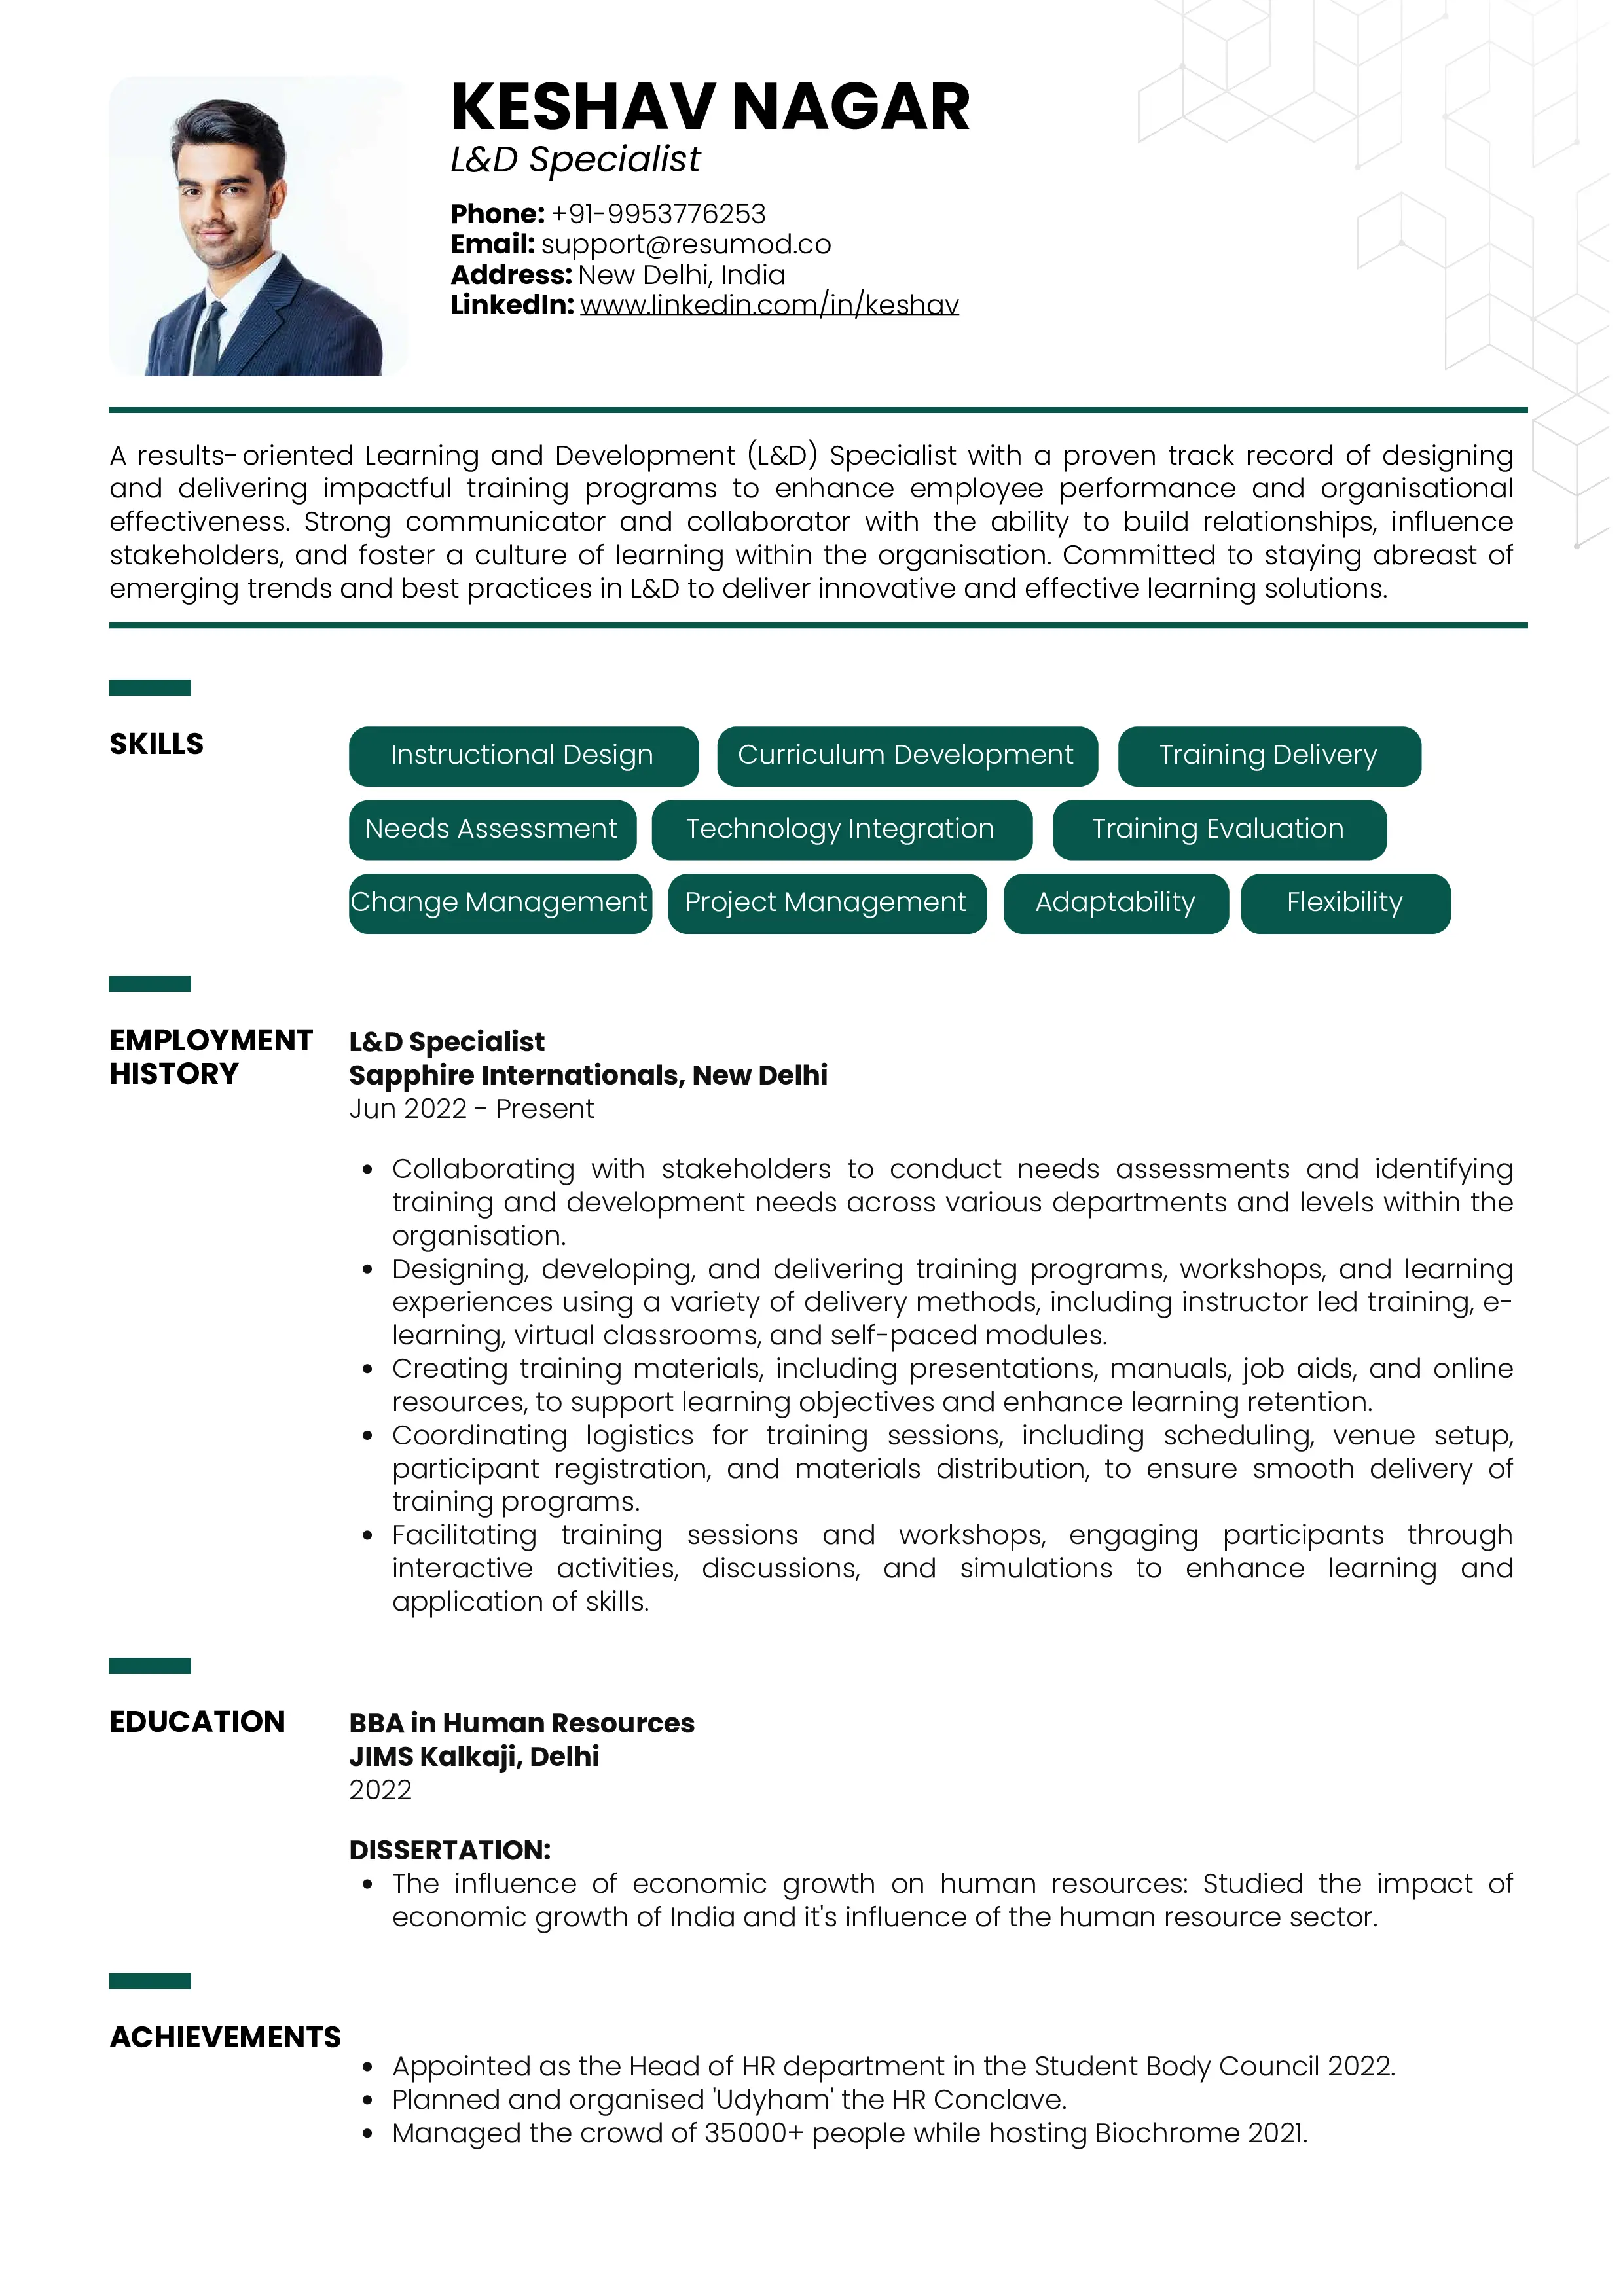 Sample Resume of L&D Specialist | Free Resume Templates & Samples on Resumod.co